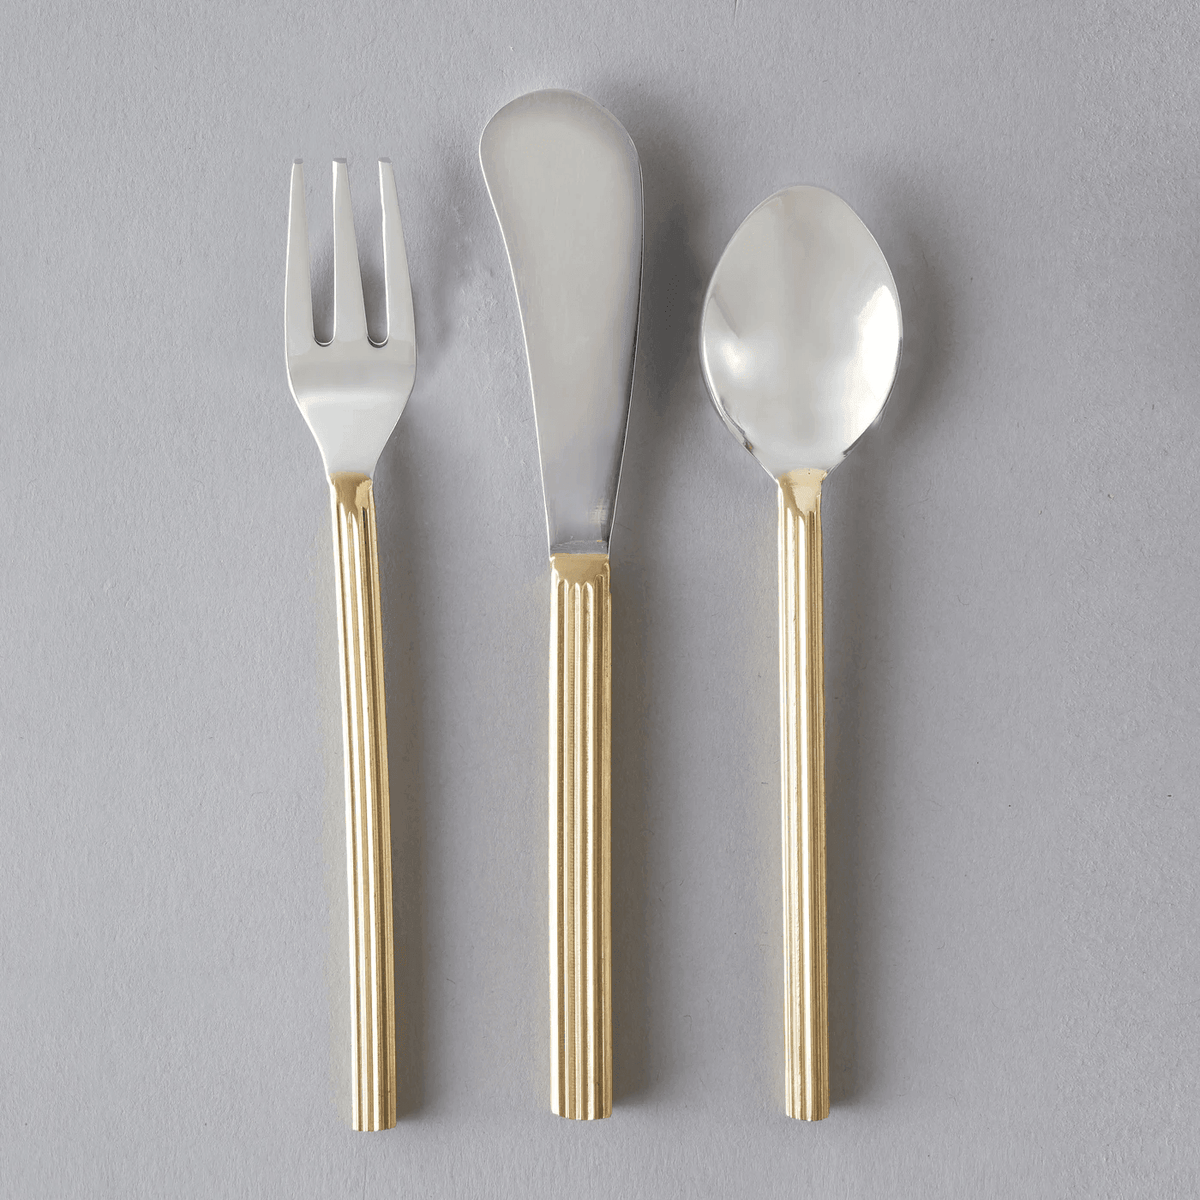 Hors D'oeuvres Set - Gold/Silver - Humble & Grand Homestore